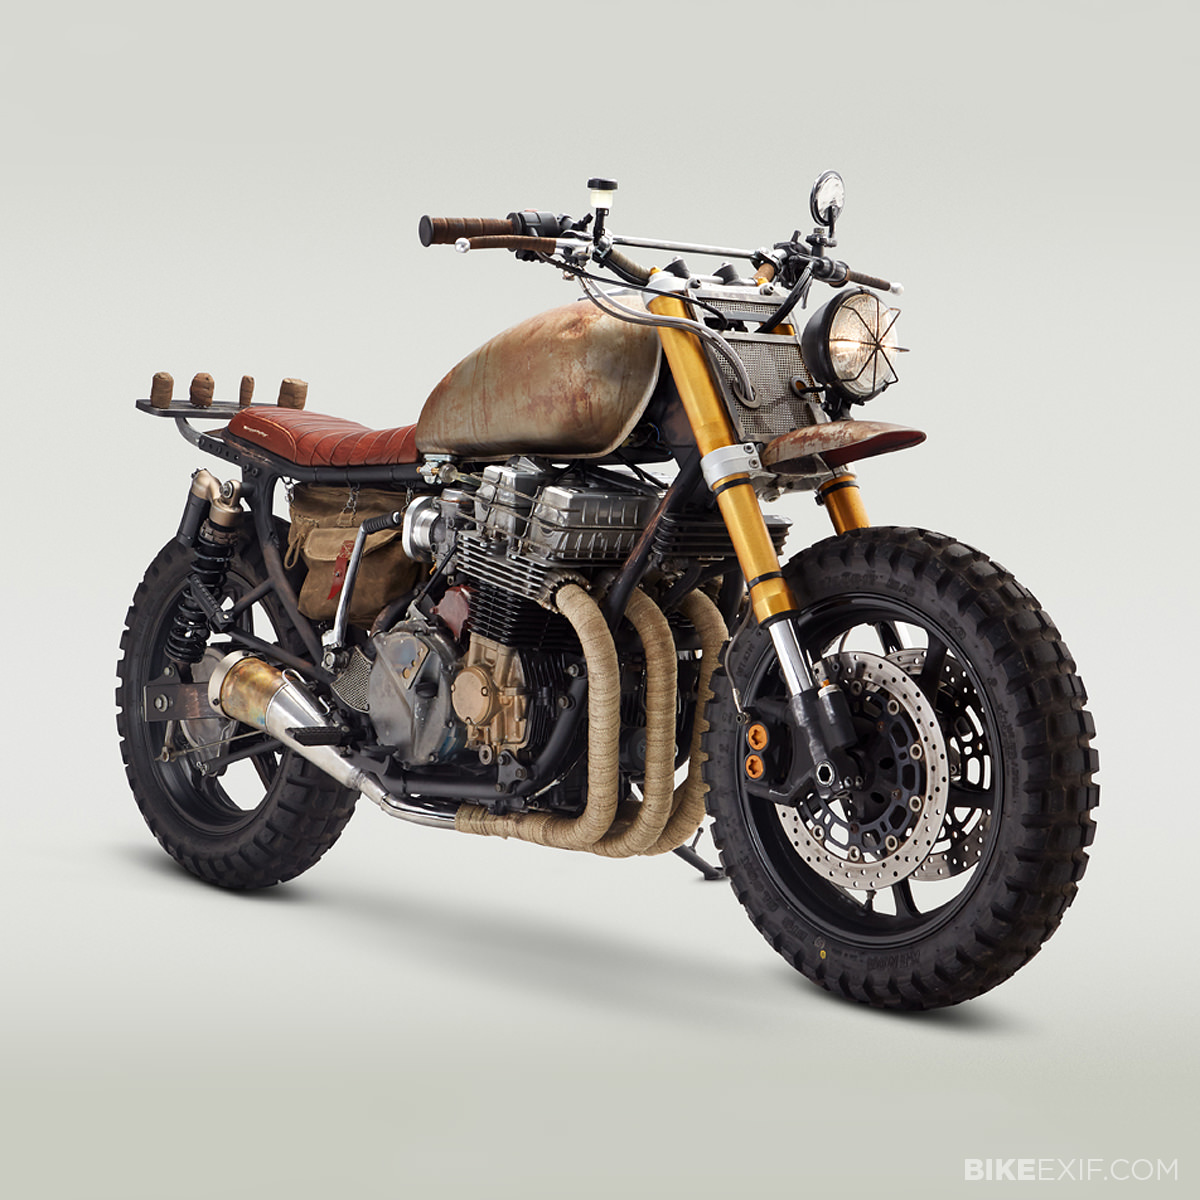 The Walking Dead The Daryl Dixon Motorcycle Bike EXIF